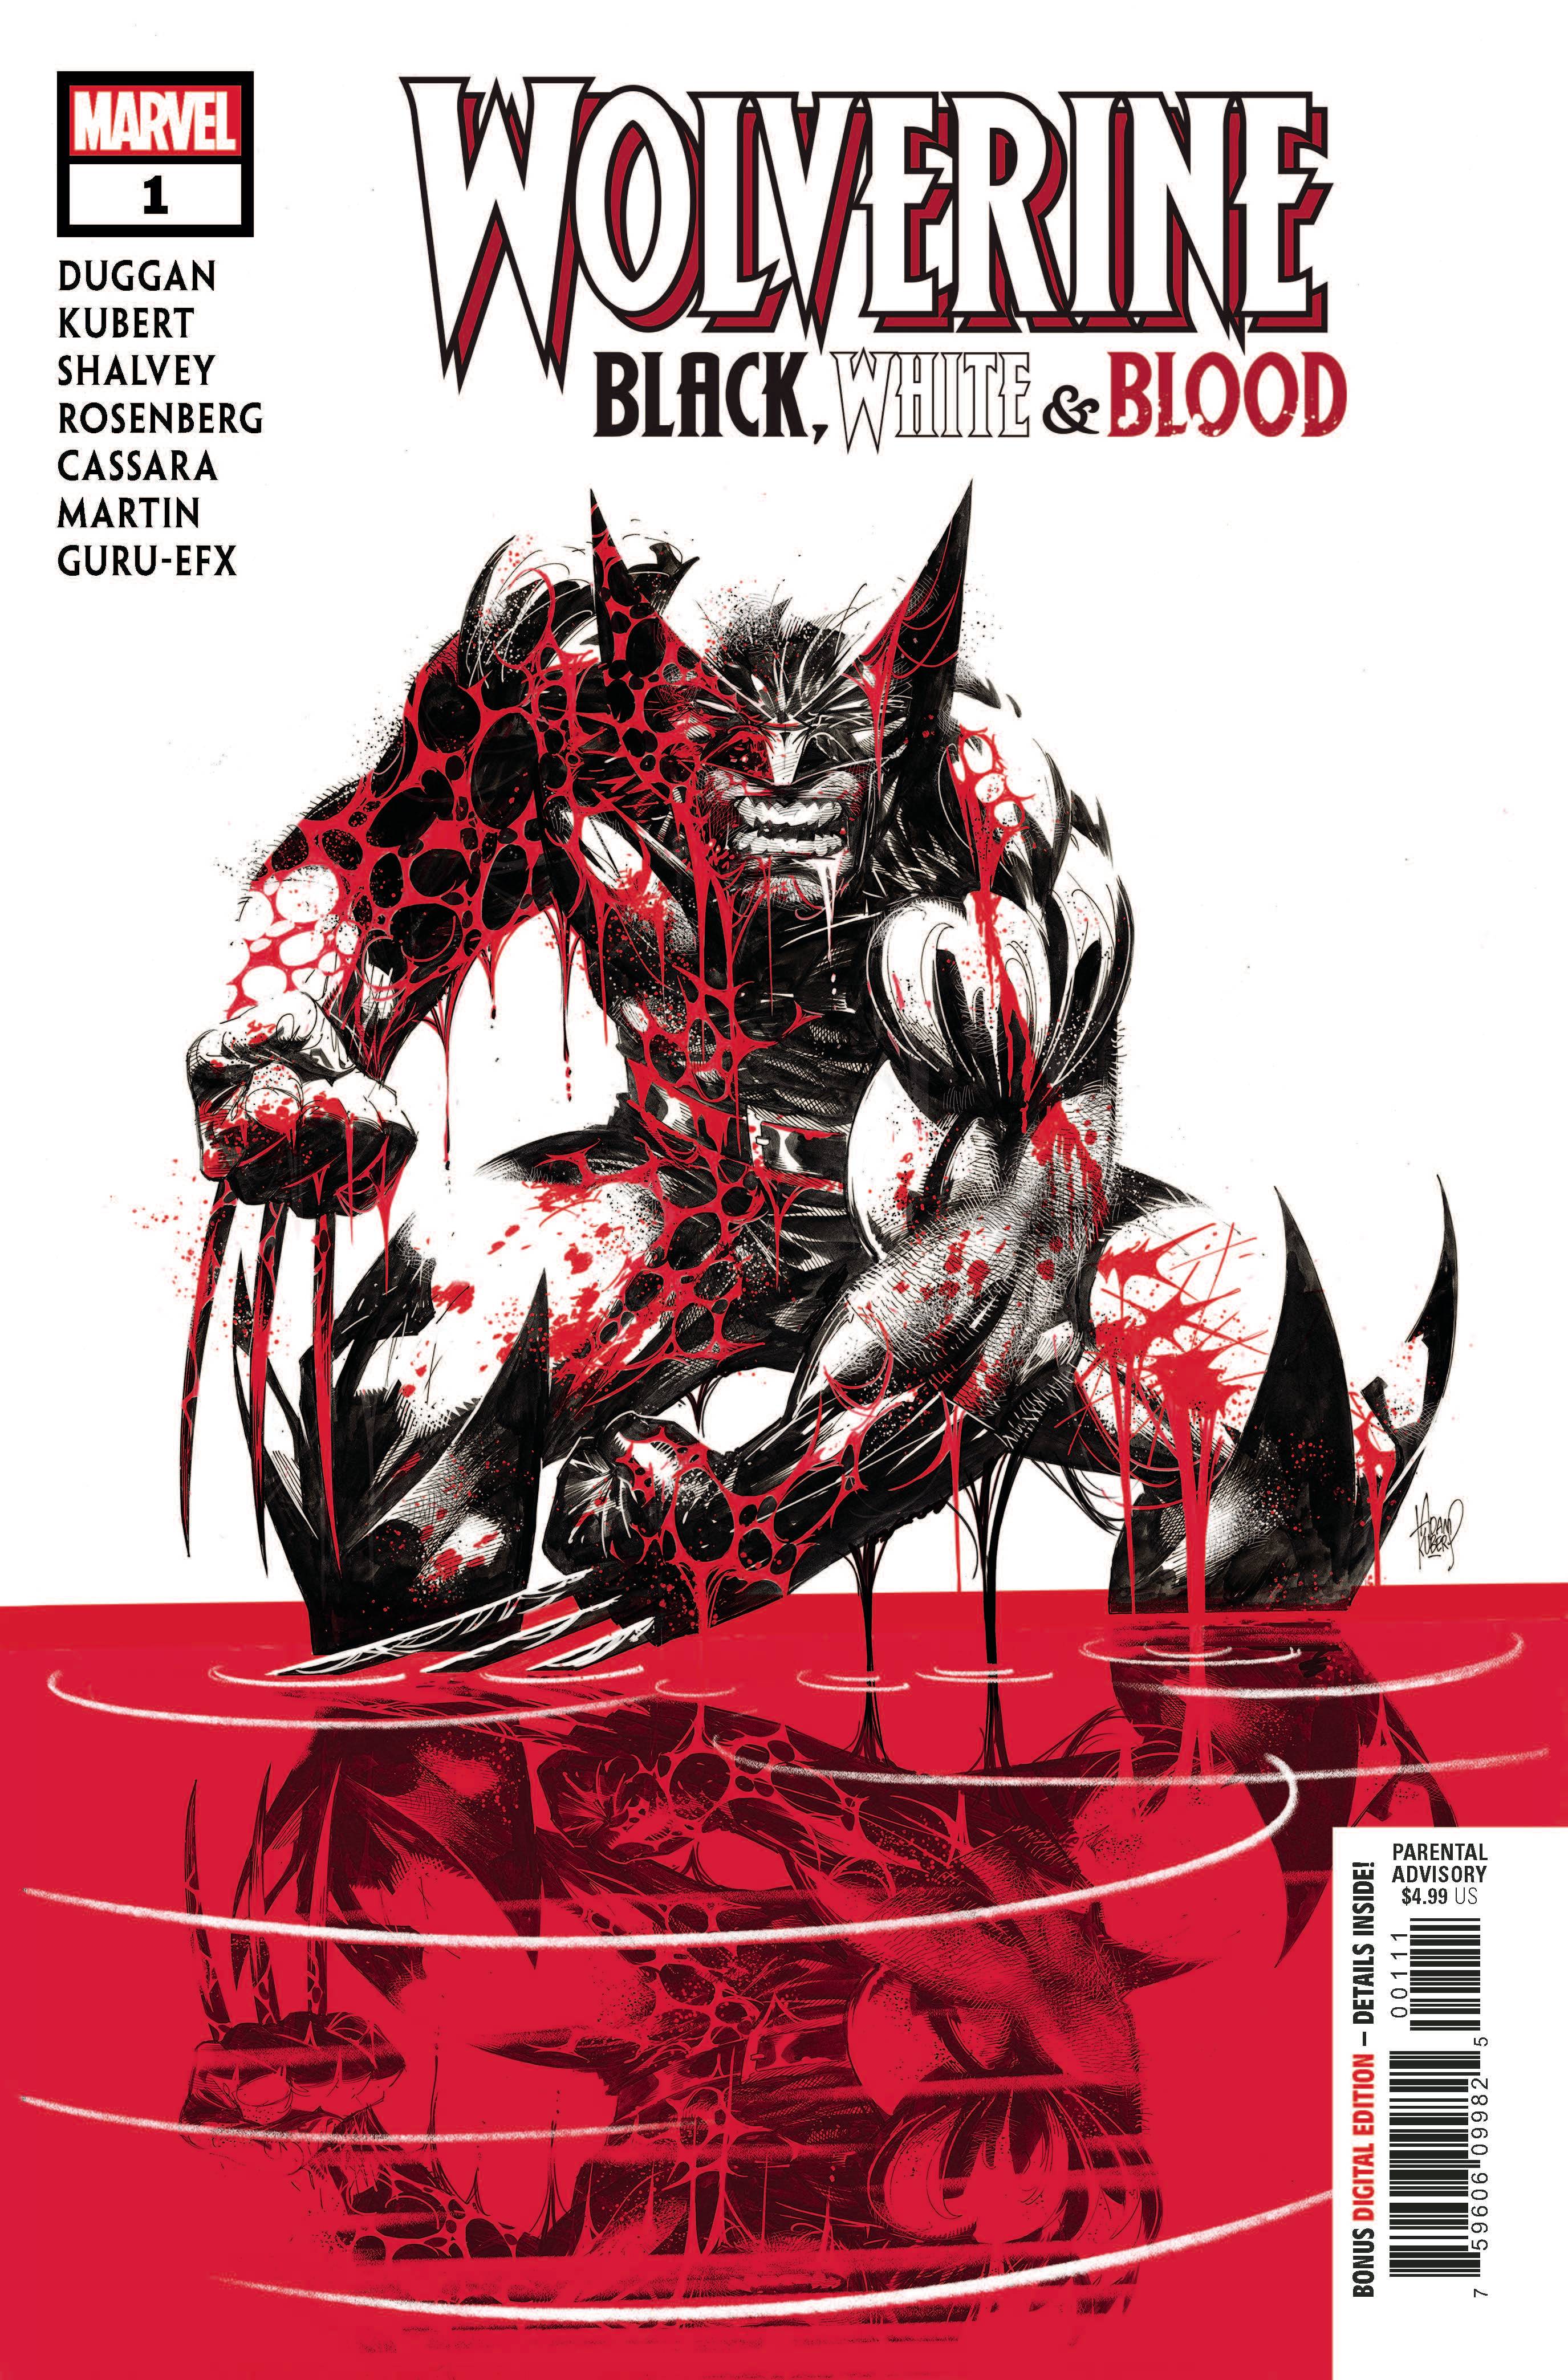 WOLVERINE BLACK WHITE BLOOD #1 (OF 4) | Game Master's Emporium (The New GME)